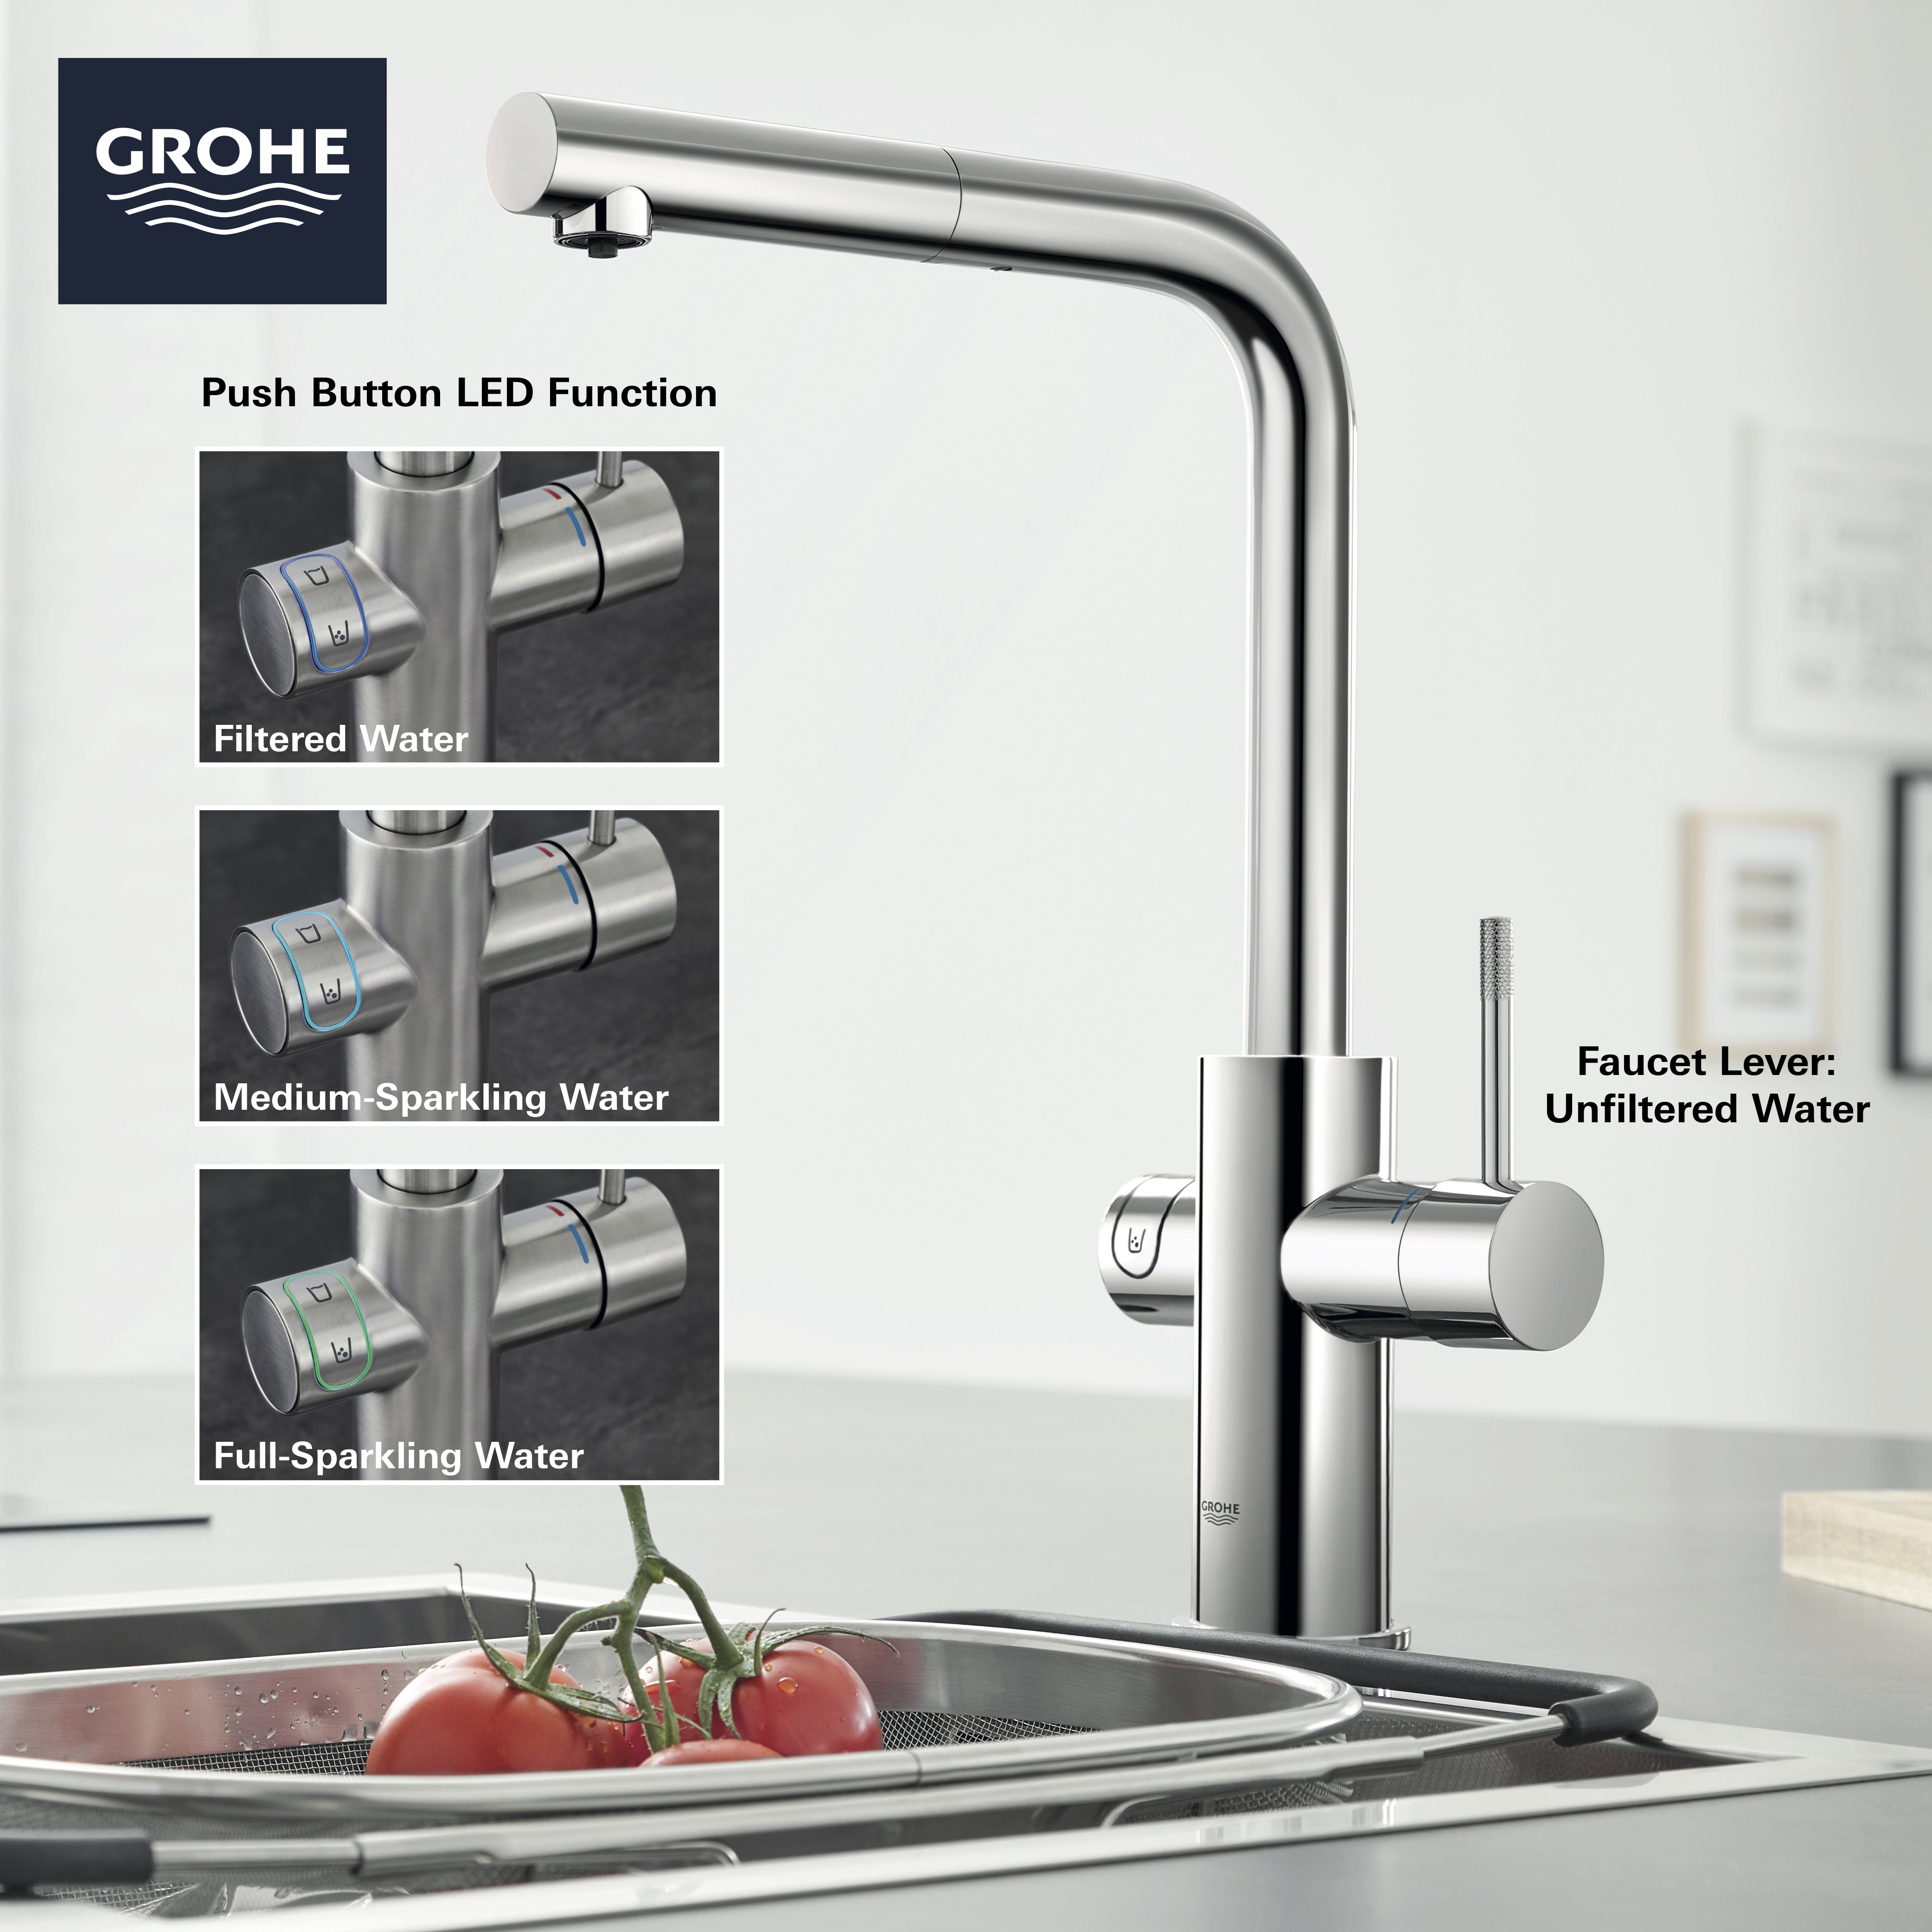 Take-back system for GROHE Blue filters